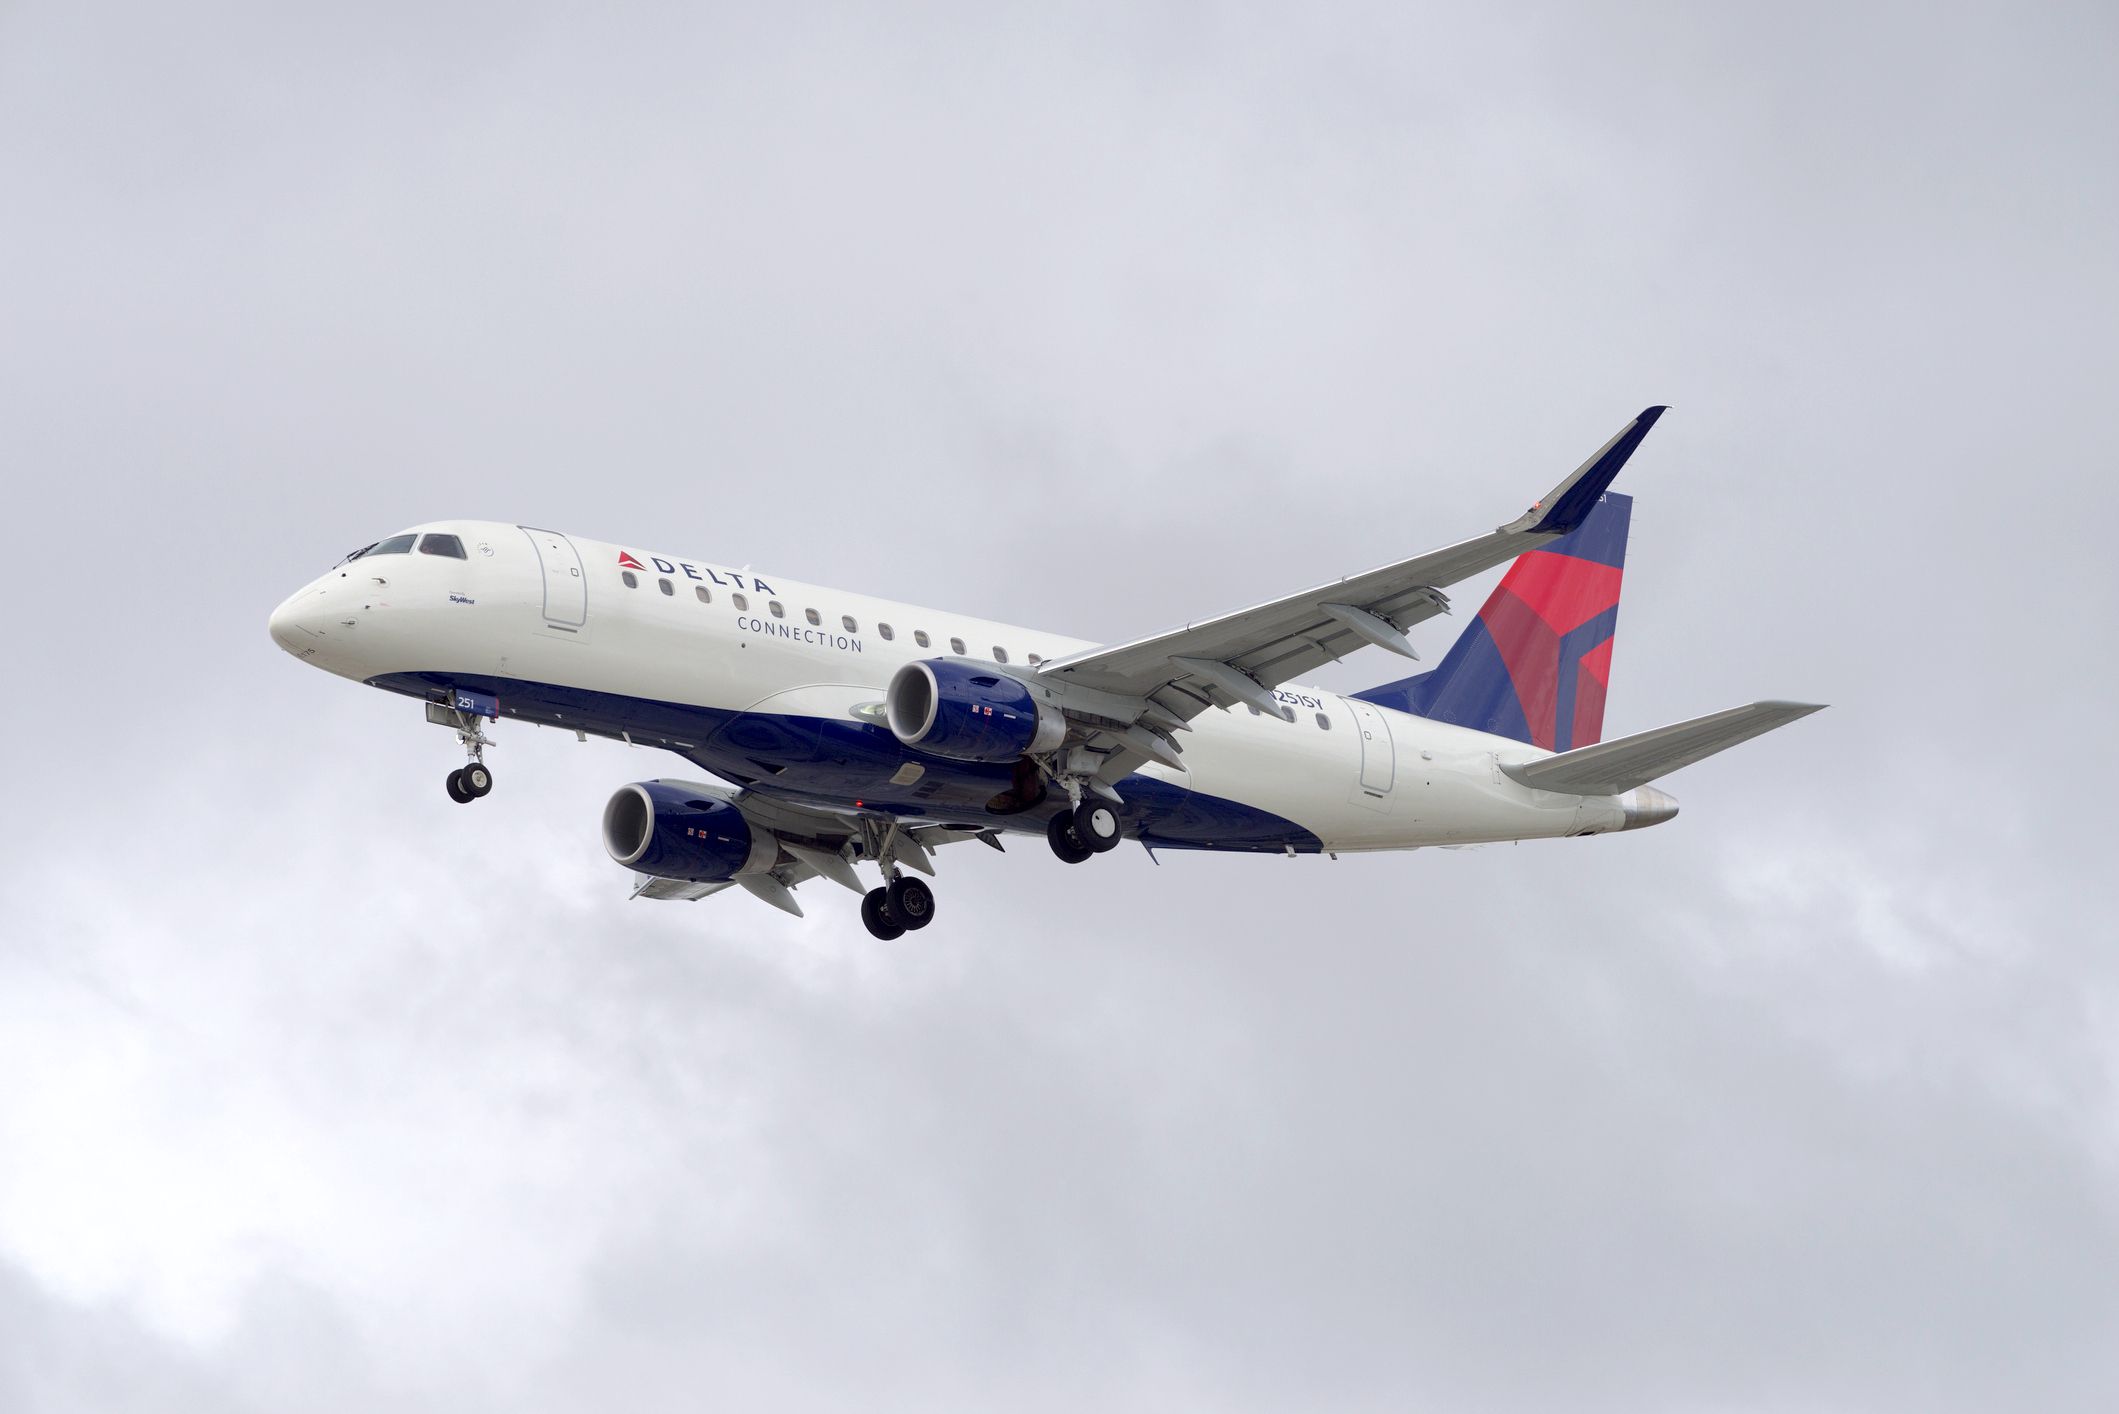 DEVELOPING: Delta Passengers Offered $10,000 EACH to Take a Later Flight?